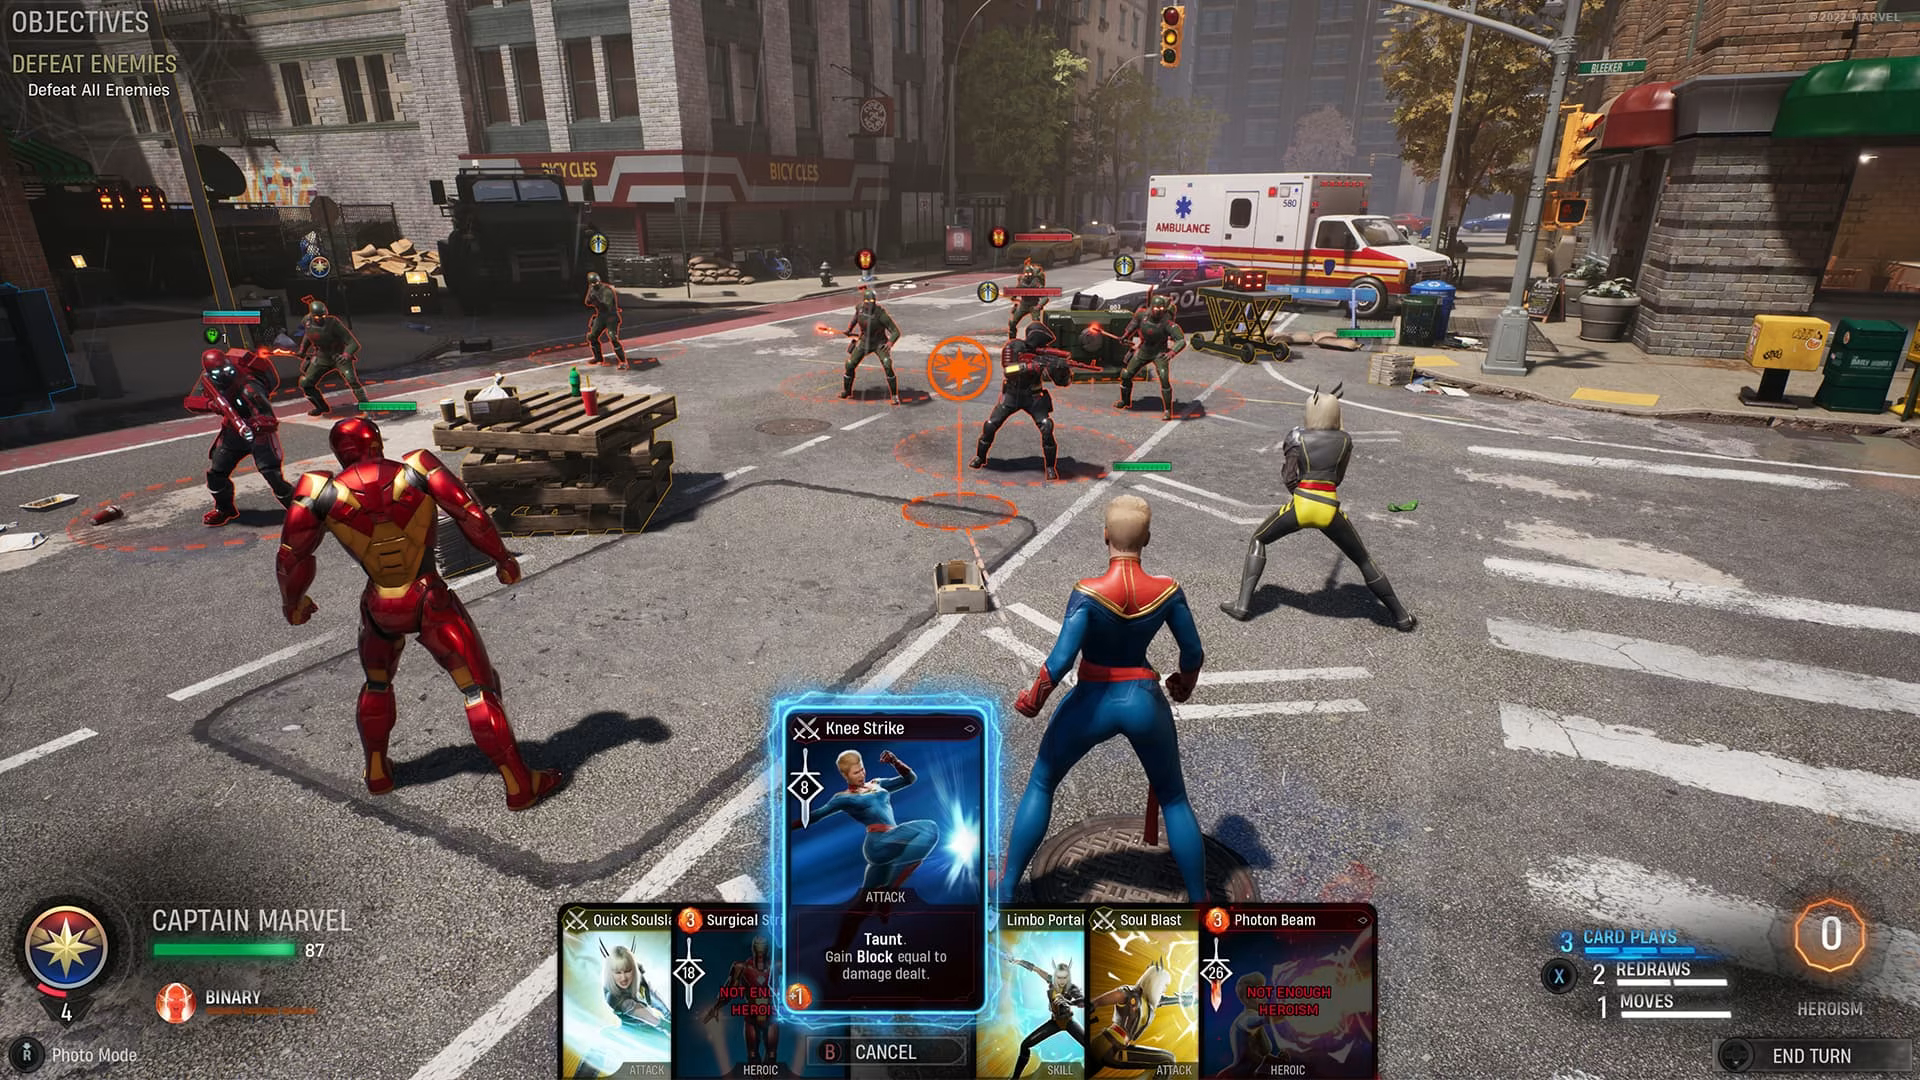 An image from Marvel's Midnight Suns showing Captain Marvel and others preparing to fight enemies